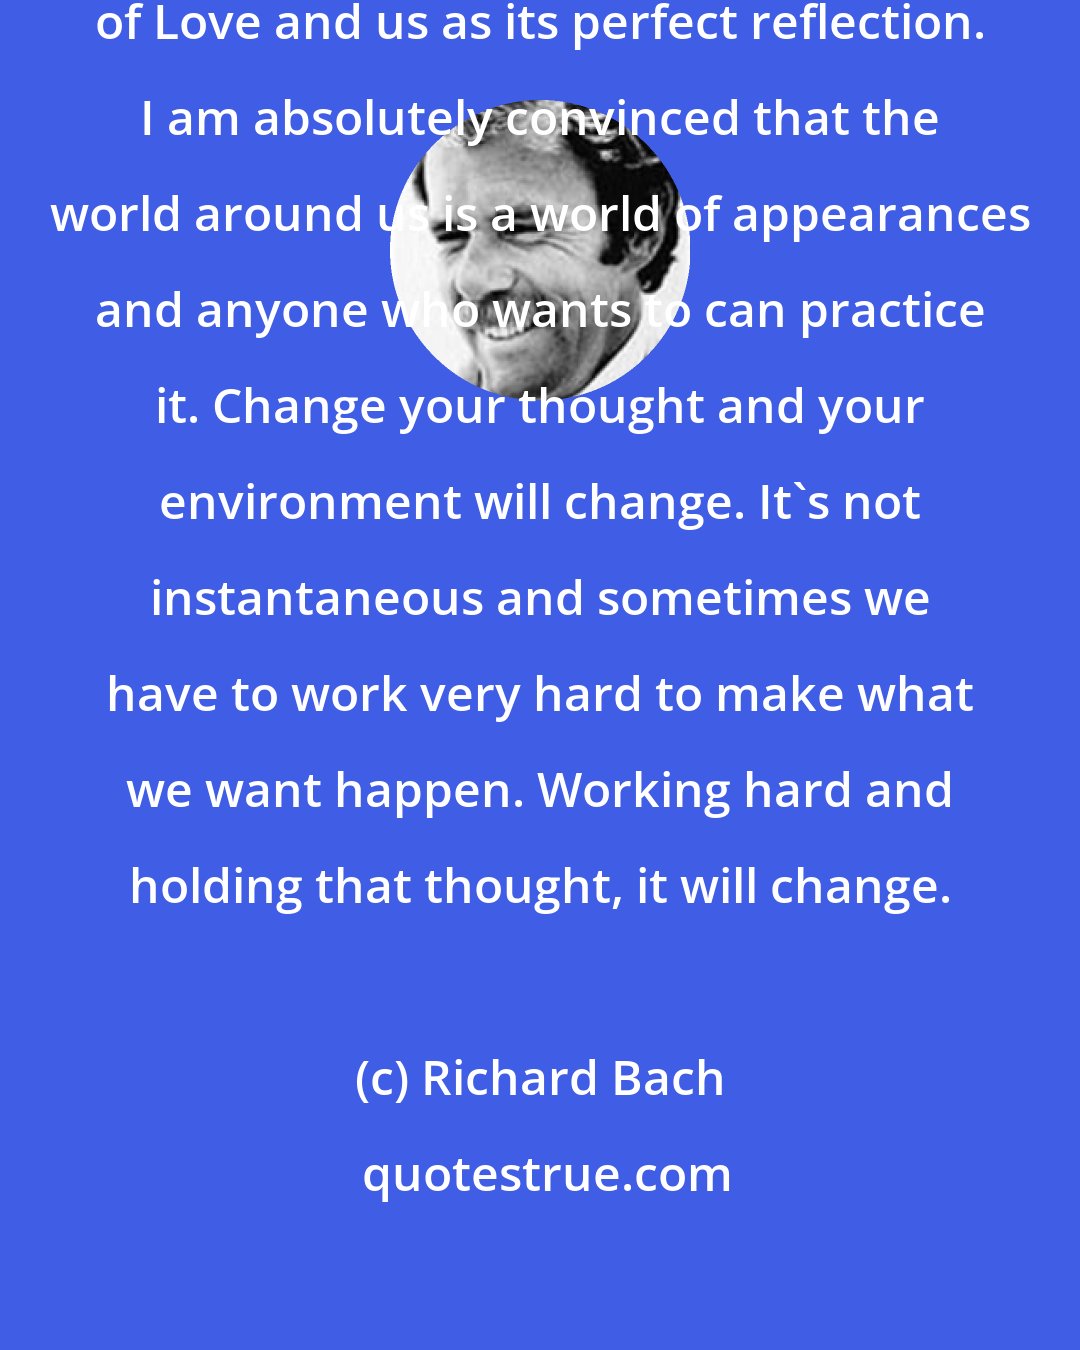 Richard Bach: I'm utterly convinced of the One-ness of Love and us as its perfect reflection. I am absolutely convinced that the world around us is a world of appearances and anyone who wants to can practice it. Change your thought and your environment will change. It's not instantaneous and sometimes we have to work very hard to make what we want happen. Working hard and holding that thought, it will change.